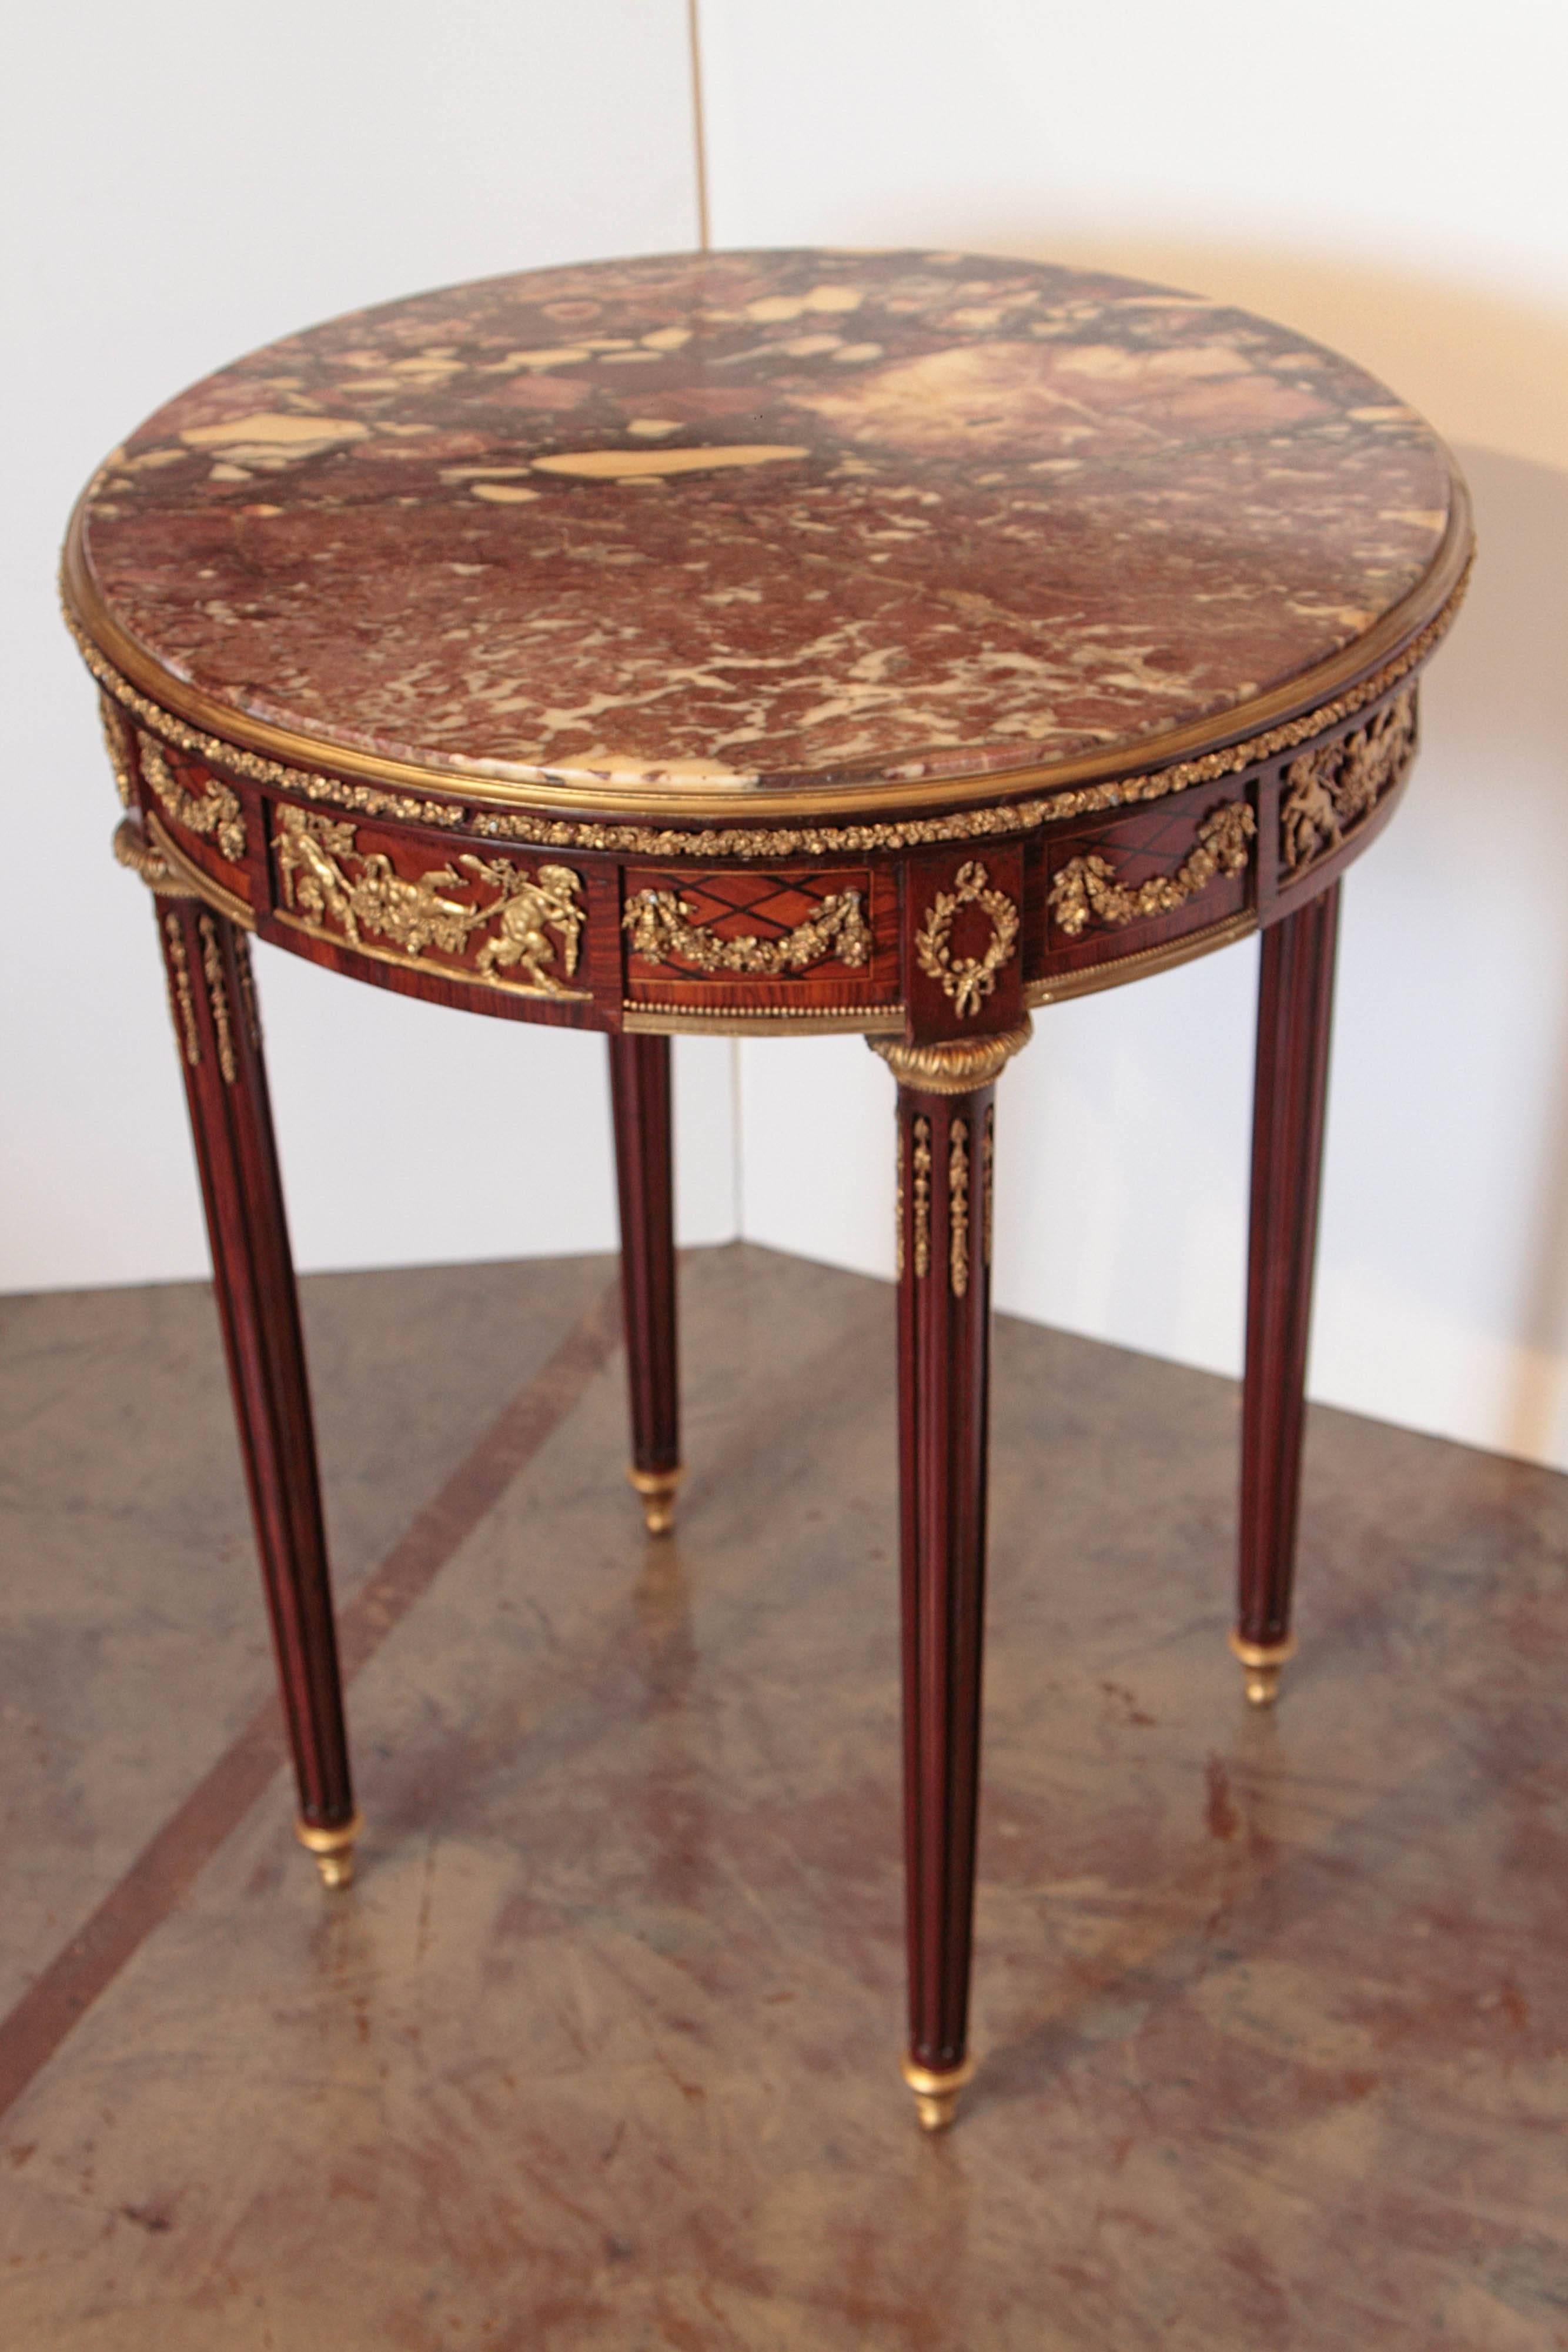 19th Century French Mahogany and Gilt Bronze Marble Top Gueridon Table For Sale 1